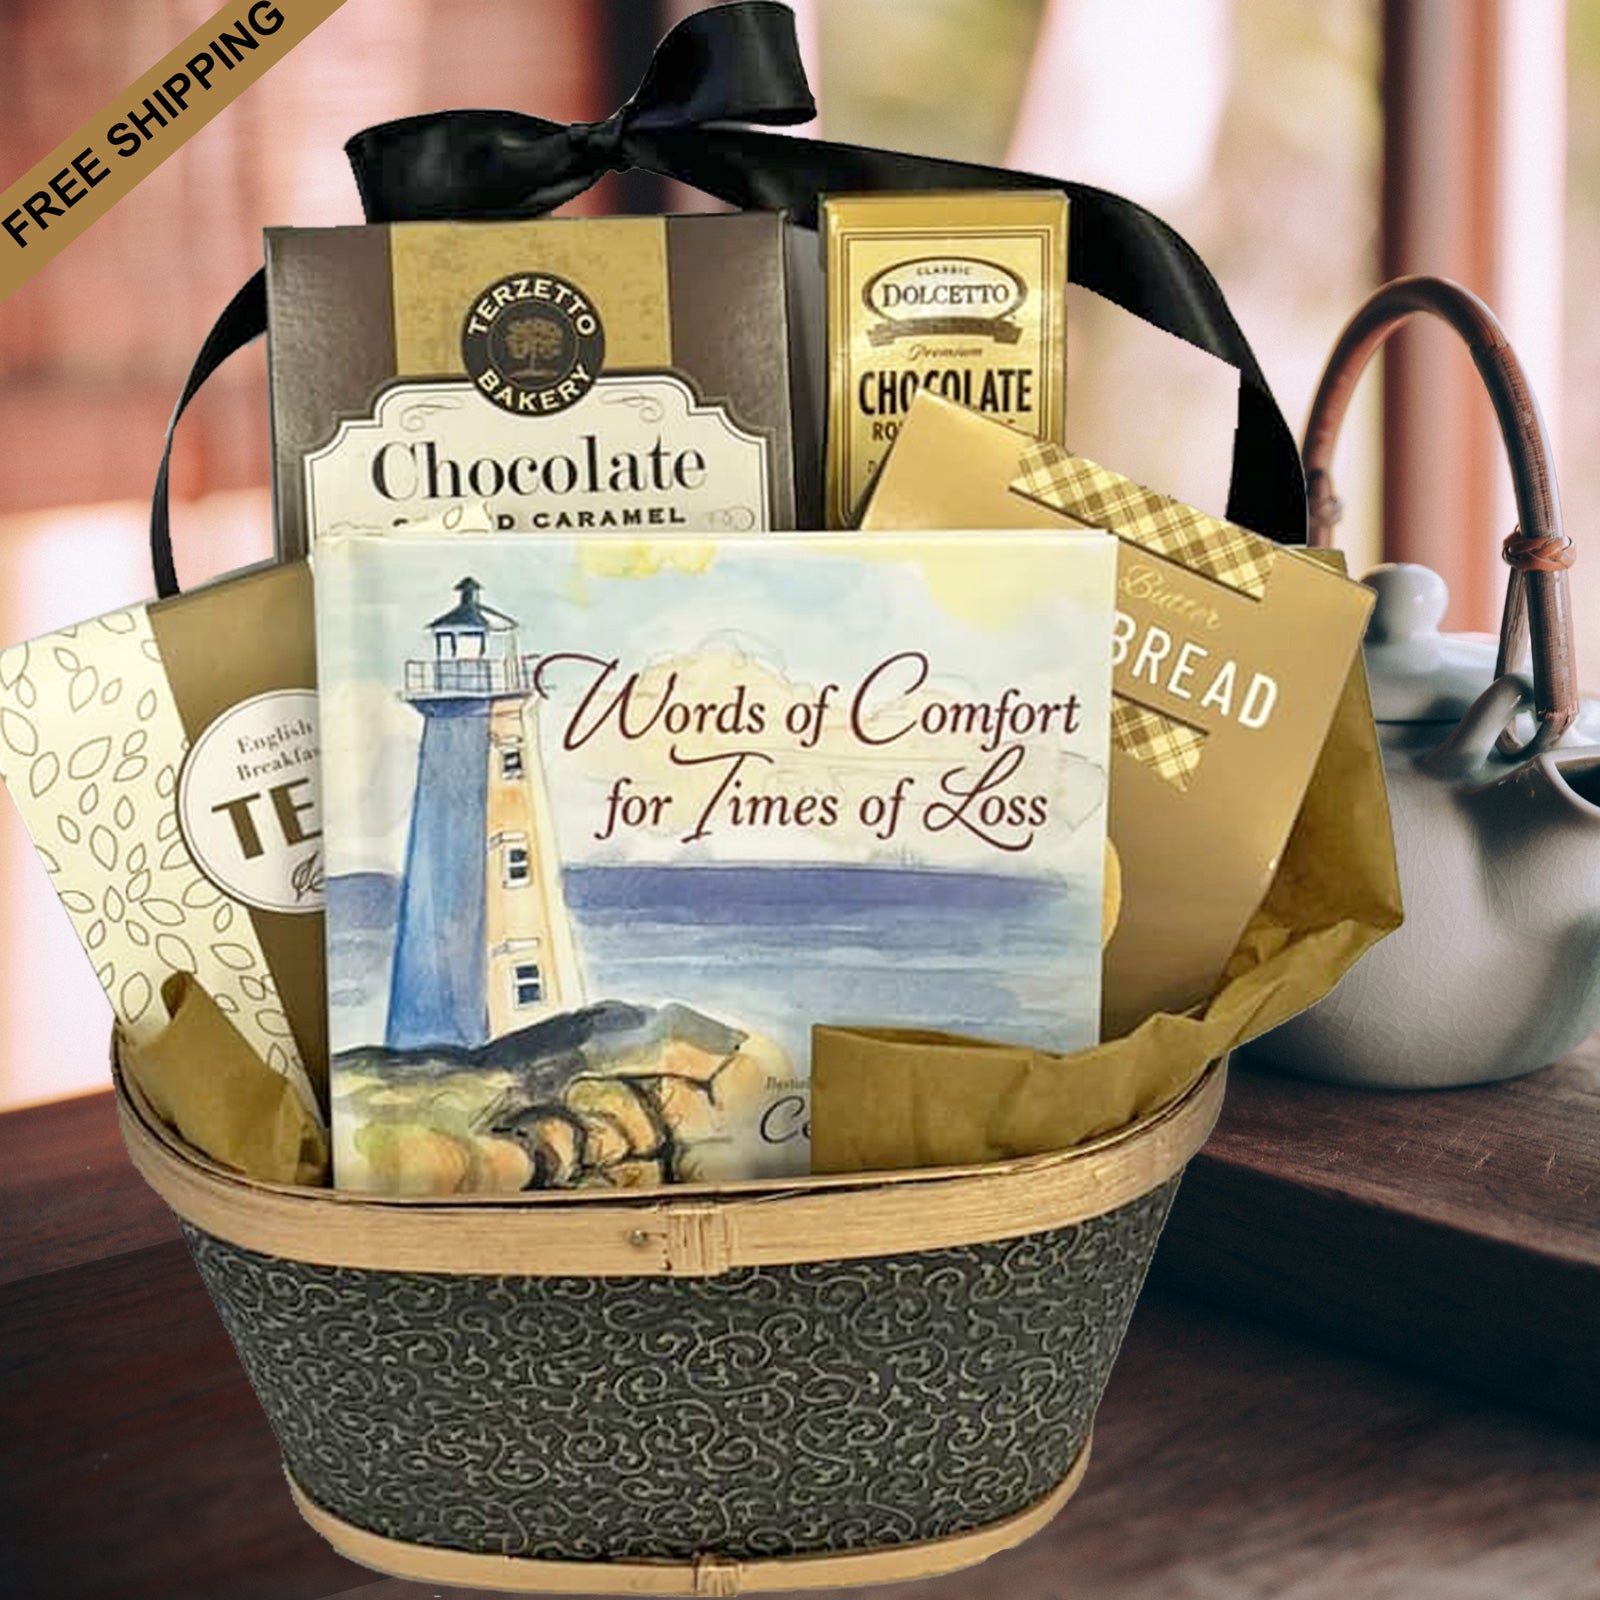 Bakery Gift Baskets & Gourmet Gifts